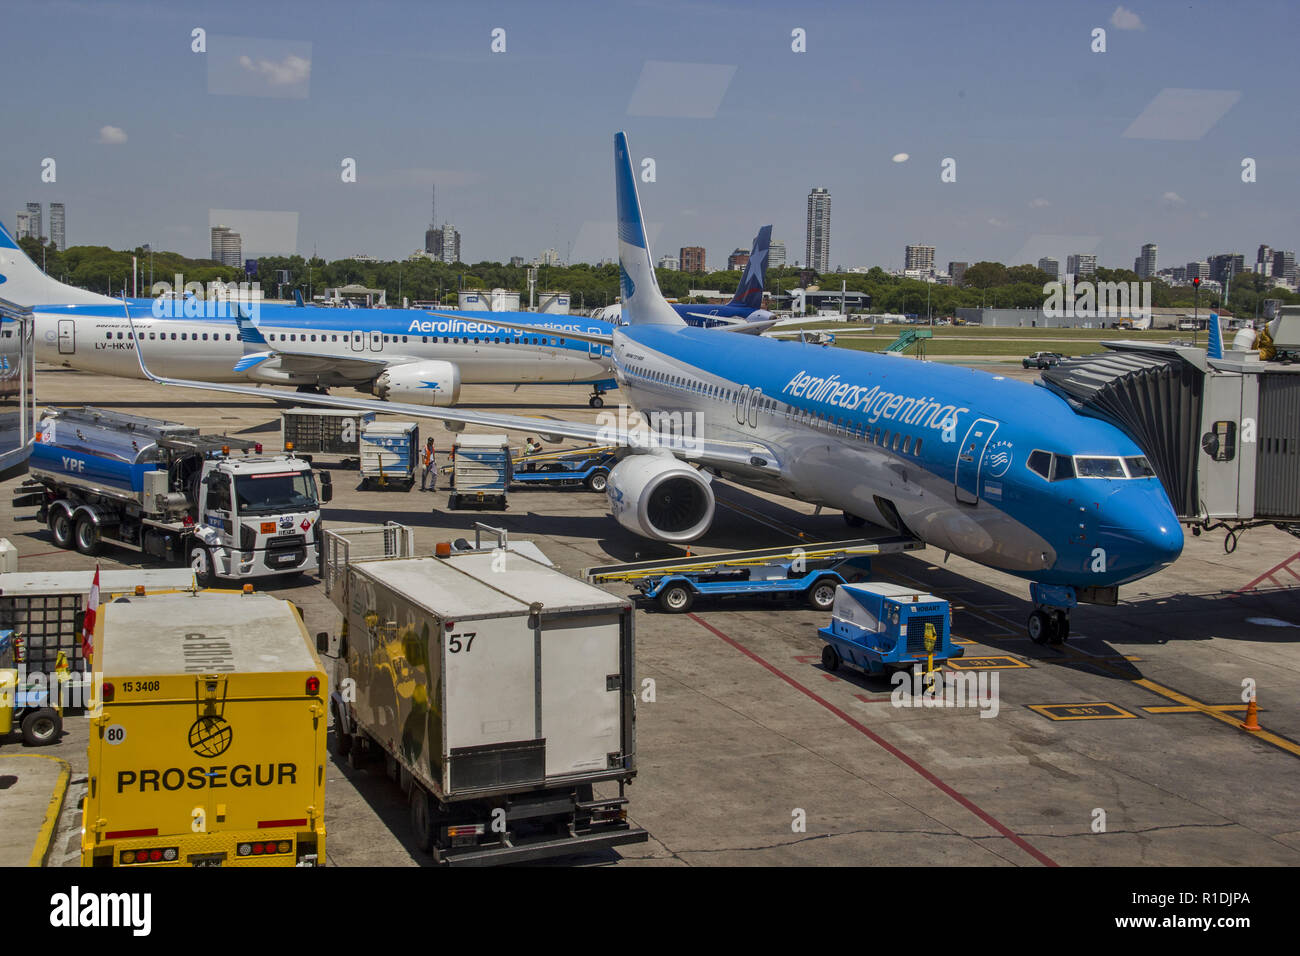 Buenos Aires, Federal Capital, Argentina. 9th Nov, 2018. On Thursday, the aeronautical unions in Argentina paralyzed the activities of the airline Aerolineas Argentinas for ten hours, leaving some 30,000 passengers stranded.Mauricio Macri again criticized the funds allocated by the State to the public company AerolÃ-neas Argentinas. Credit: Roberto Almeida Aveledo/ZUMA Wire/Alamy Live News Stock Photo